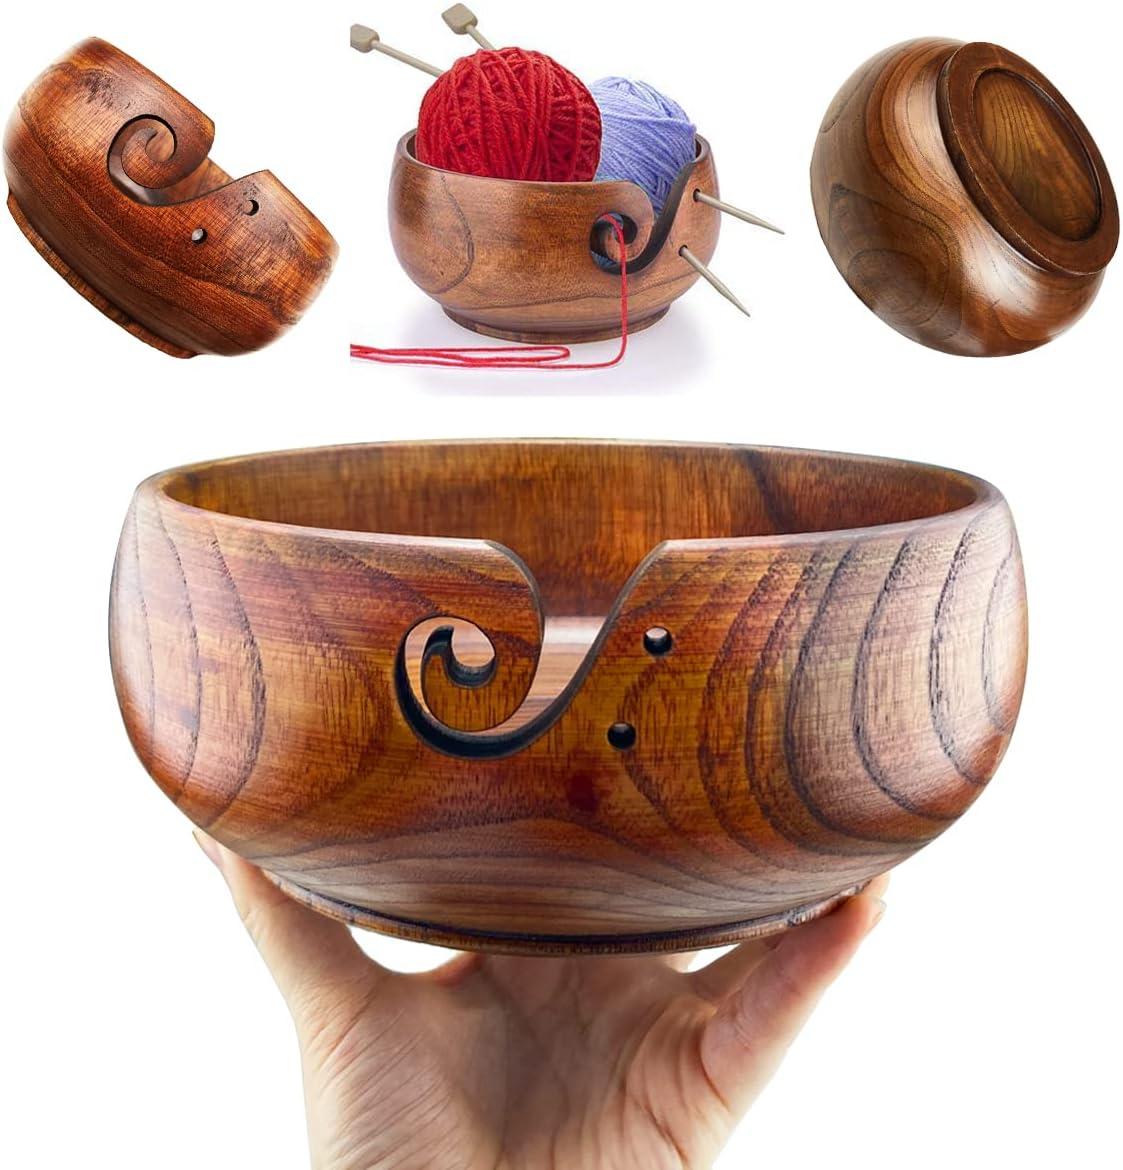 Wooden Yarn Bowl with Holes Holder 7.87''3''Rosewood Handmade Craft  Knitting Bowl Storage Knitting and Crocheting Accessories Kit Organizer,  Perfect for Mother's Day and Christmas Gift X-Large